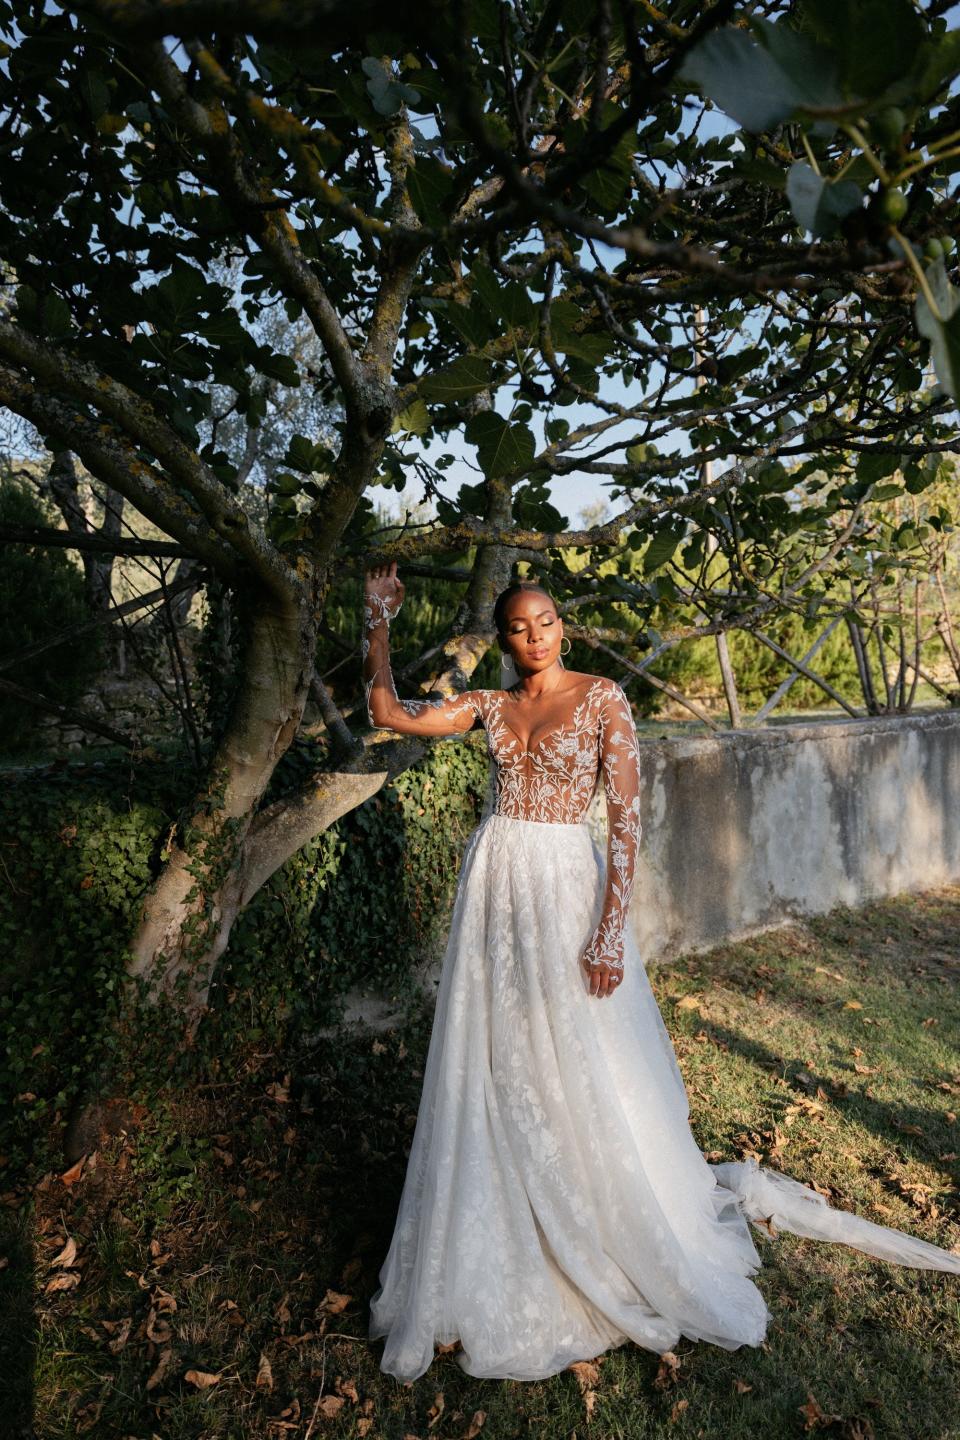 A bride closes her eyes and poses by a tree while wearing her wedding dress.